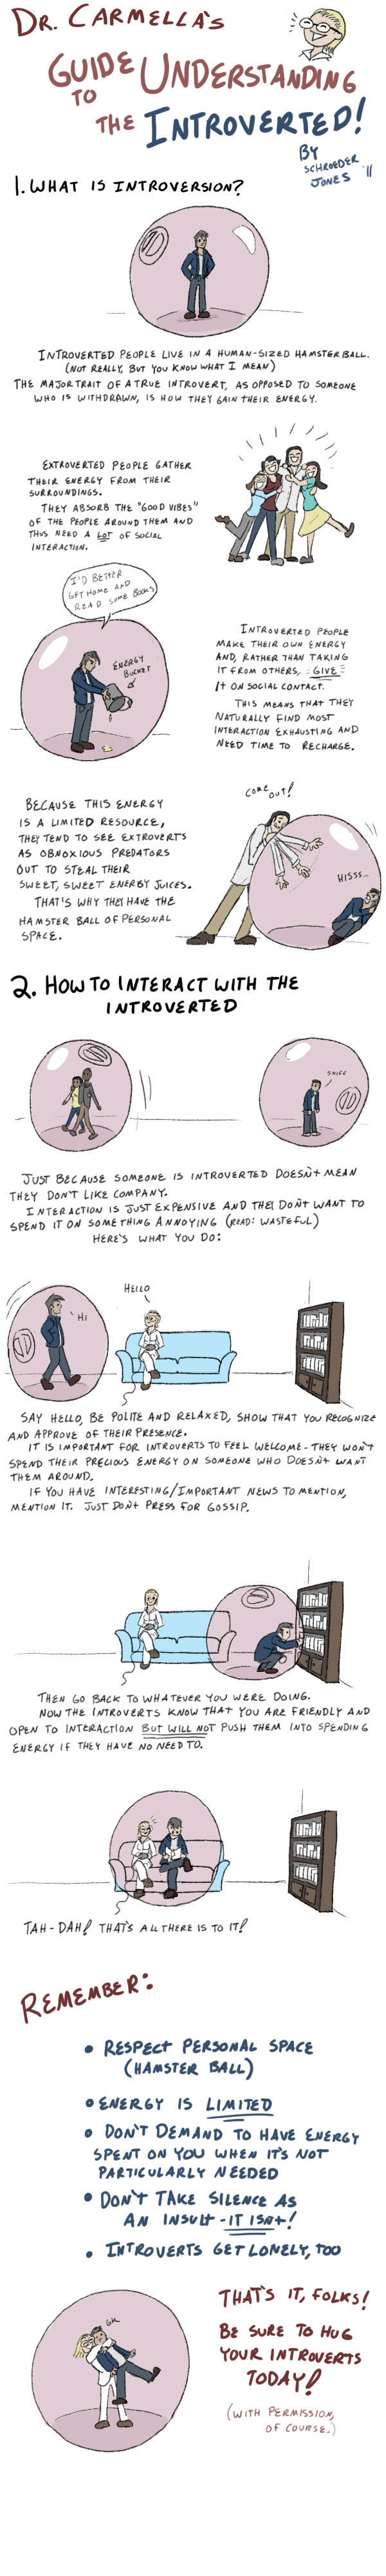 how_to_live_with_introverts_by_schrojones-d4tfoyo